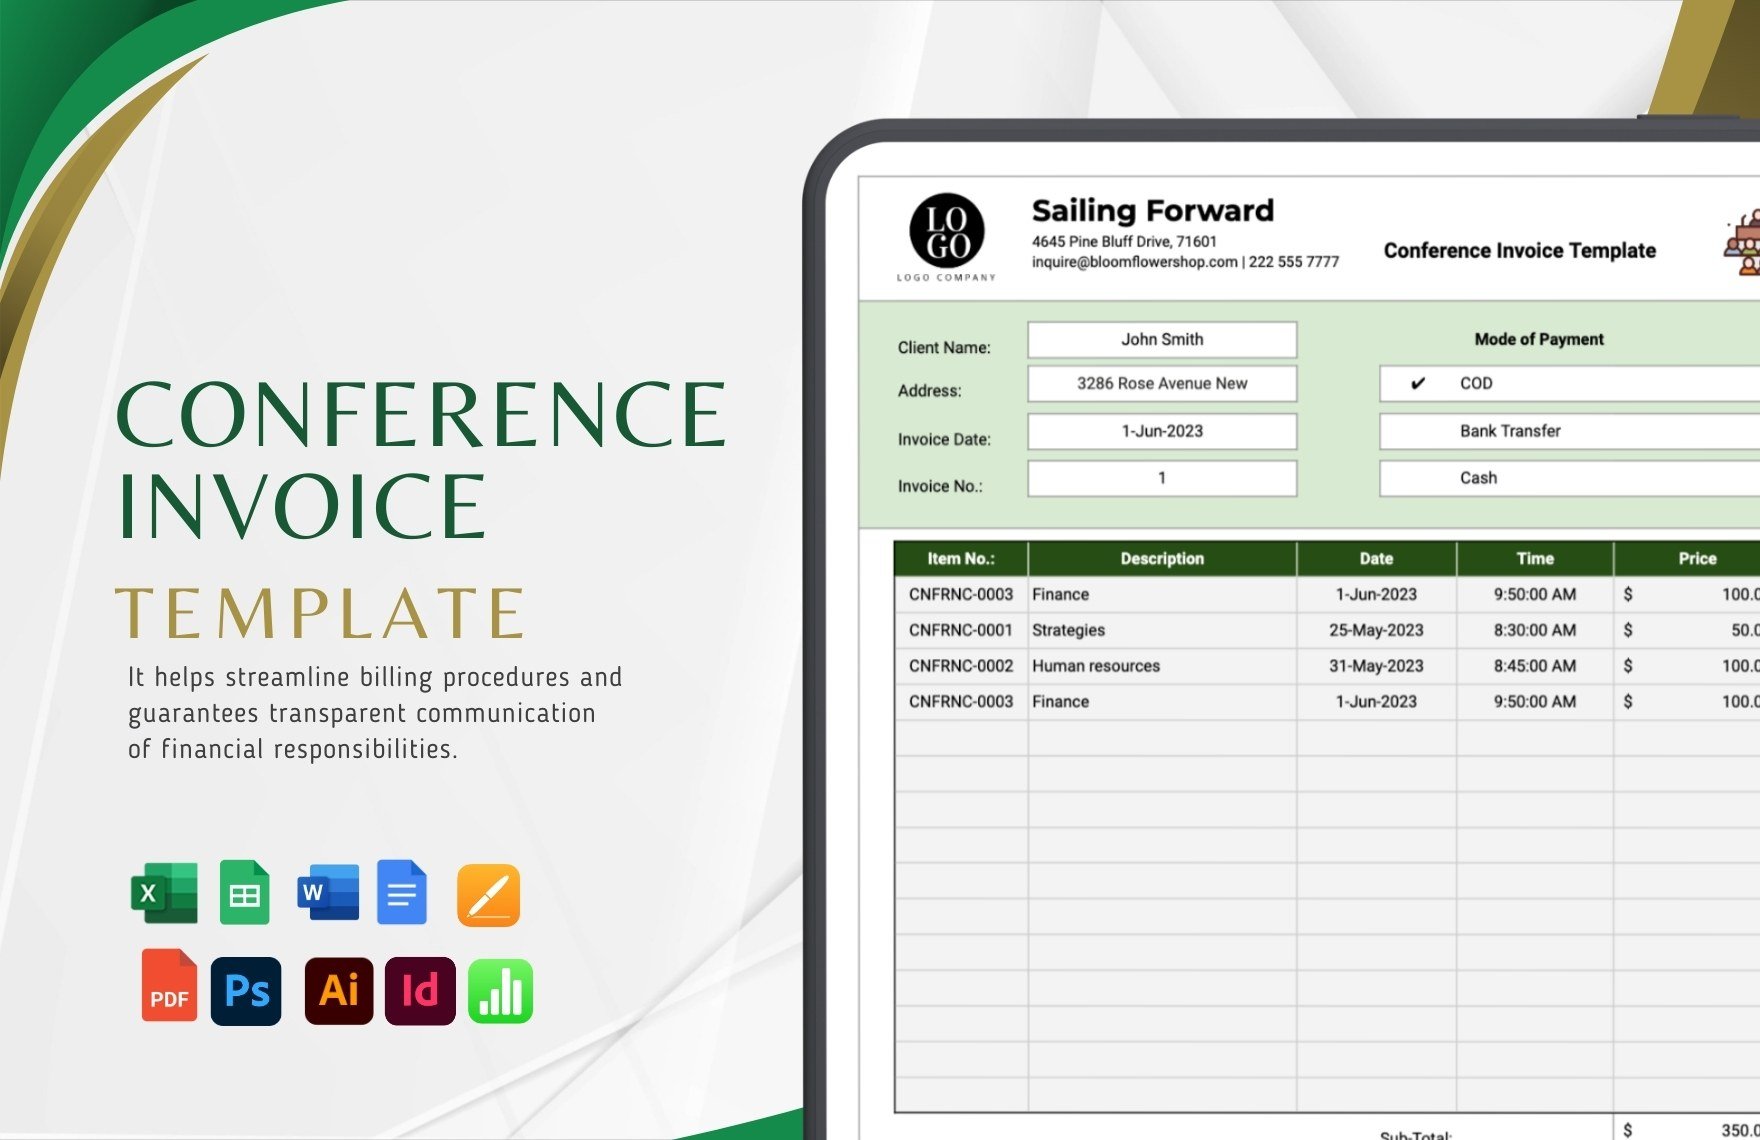 Conference Invoice Template in Word, Google Docs, Excel, PDF, Google Sheets, Illustrator, PSD, Apple Pages, InDesign, Apple Numbers